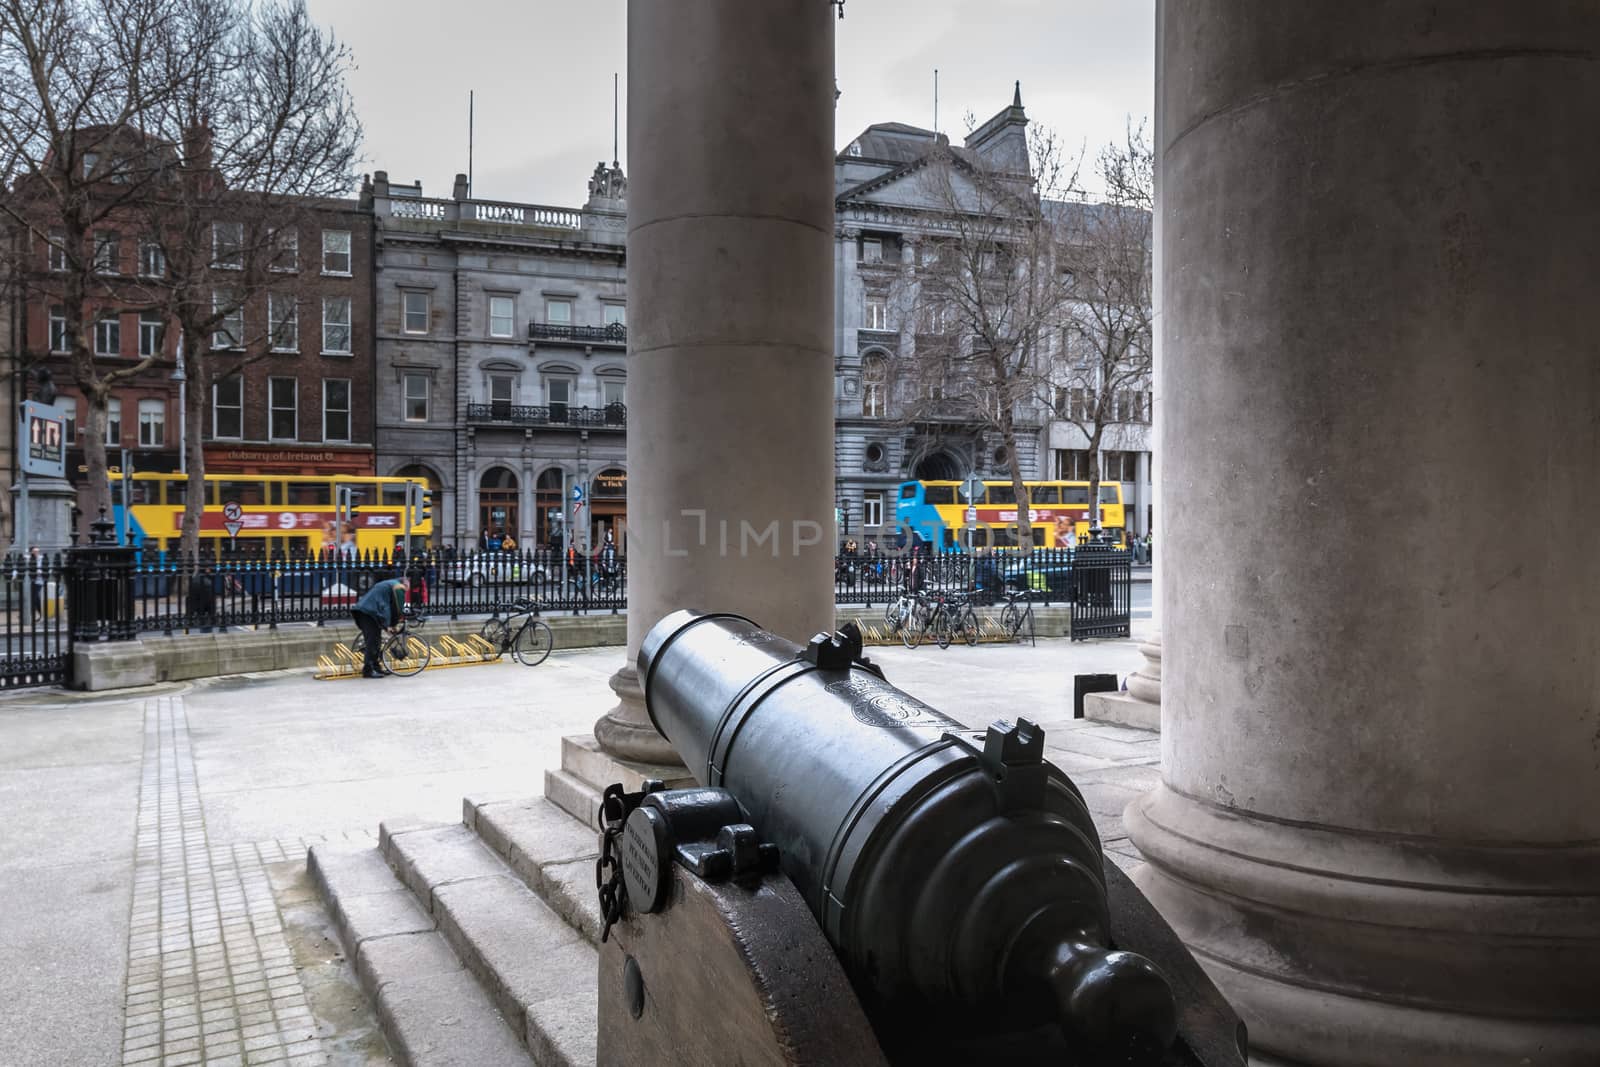 Dublin, Ireland - February 11, 2019: Architecture detail of Bank of Ireland in the city center on a winter day